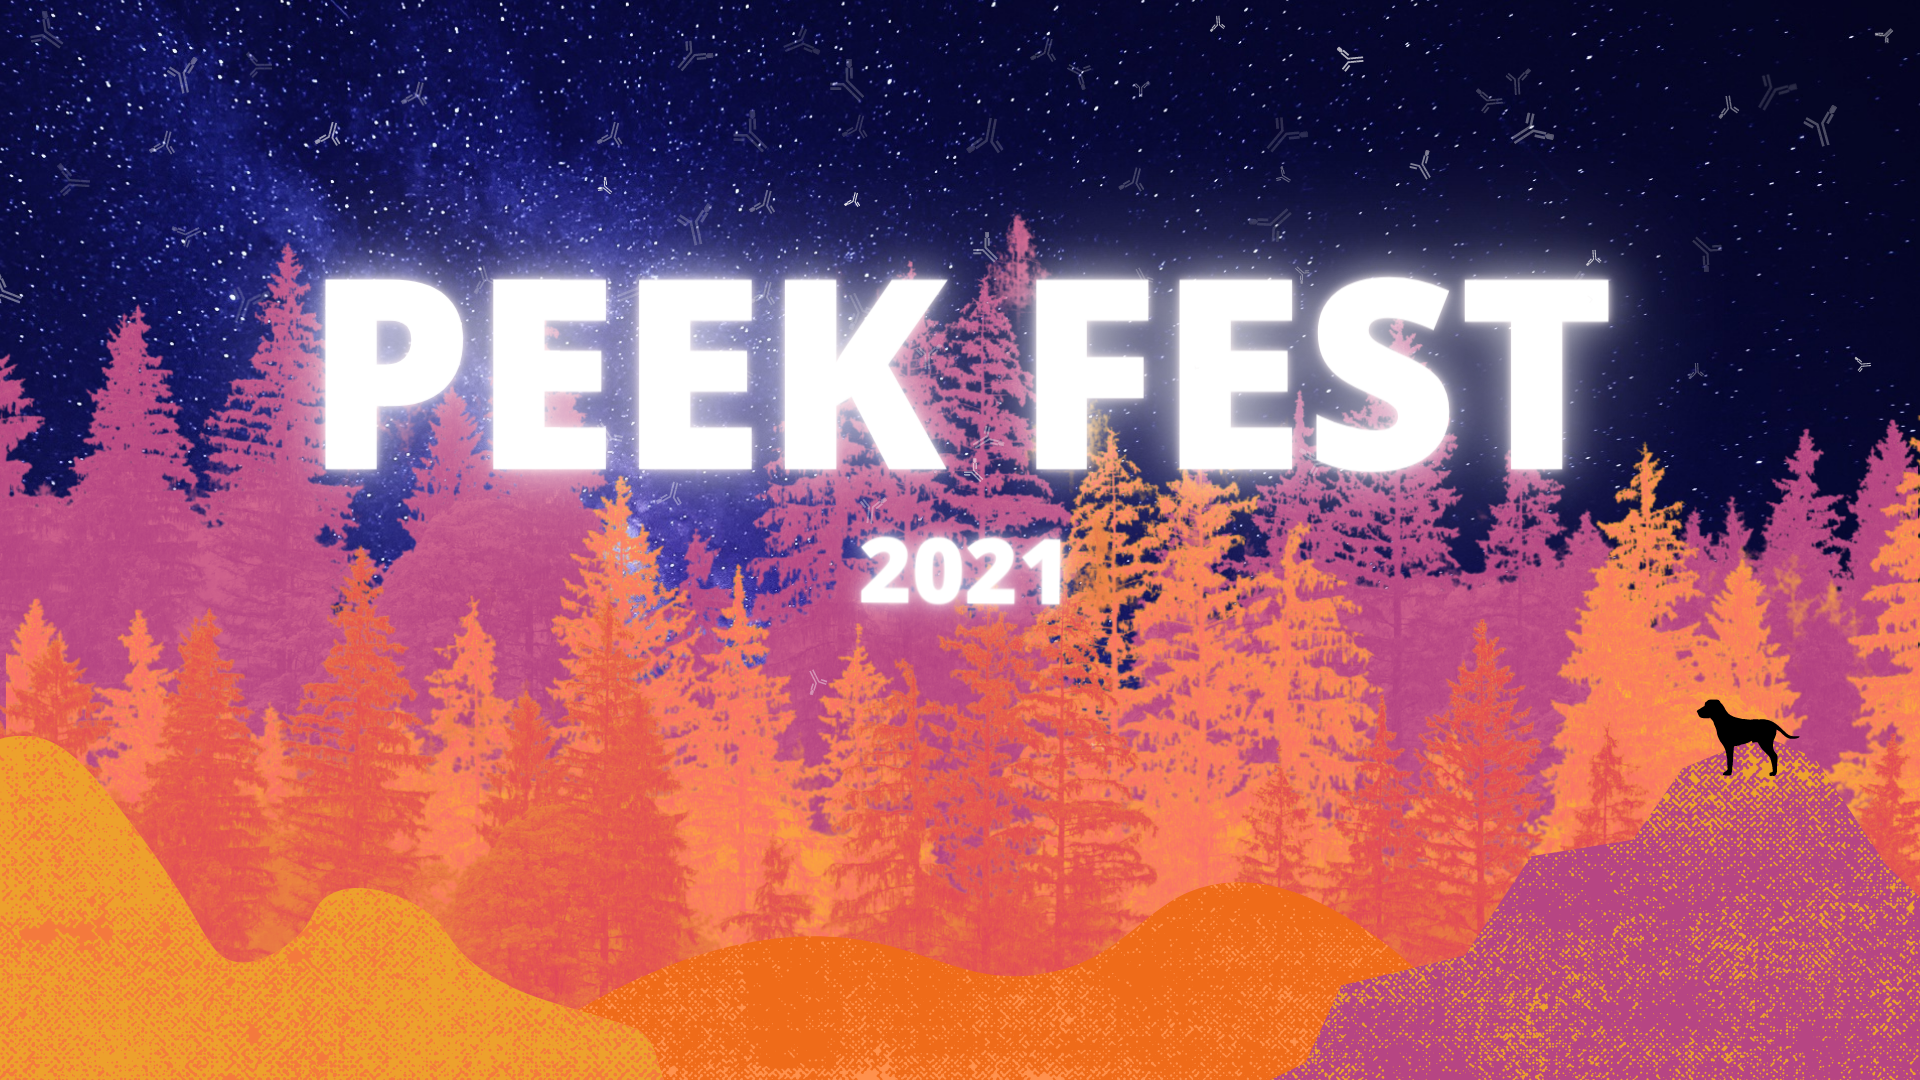 Graphic provided by PEEK Fest.